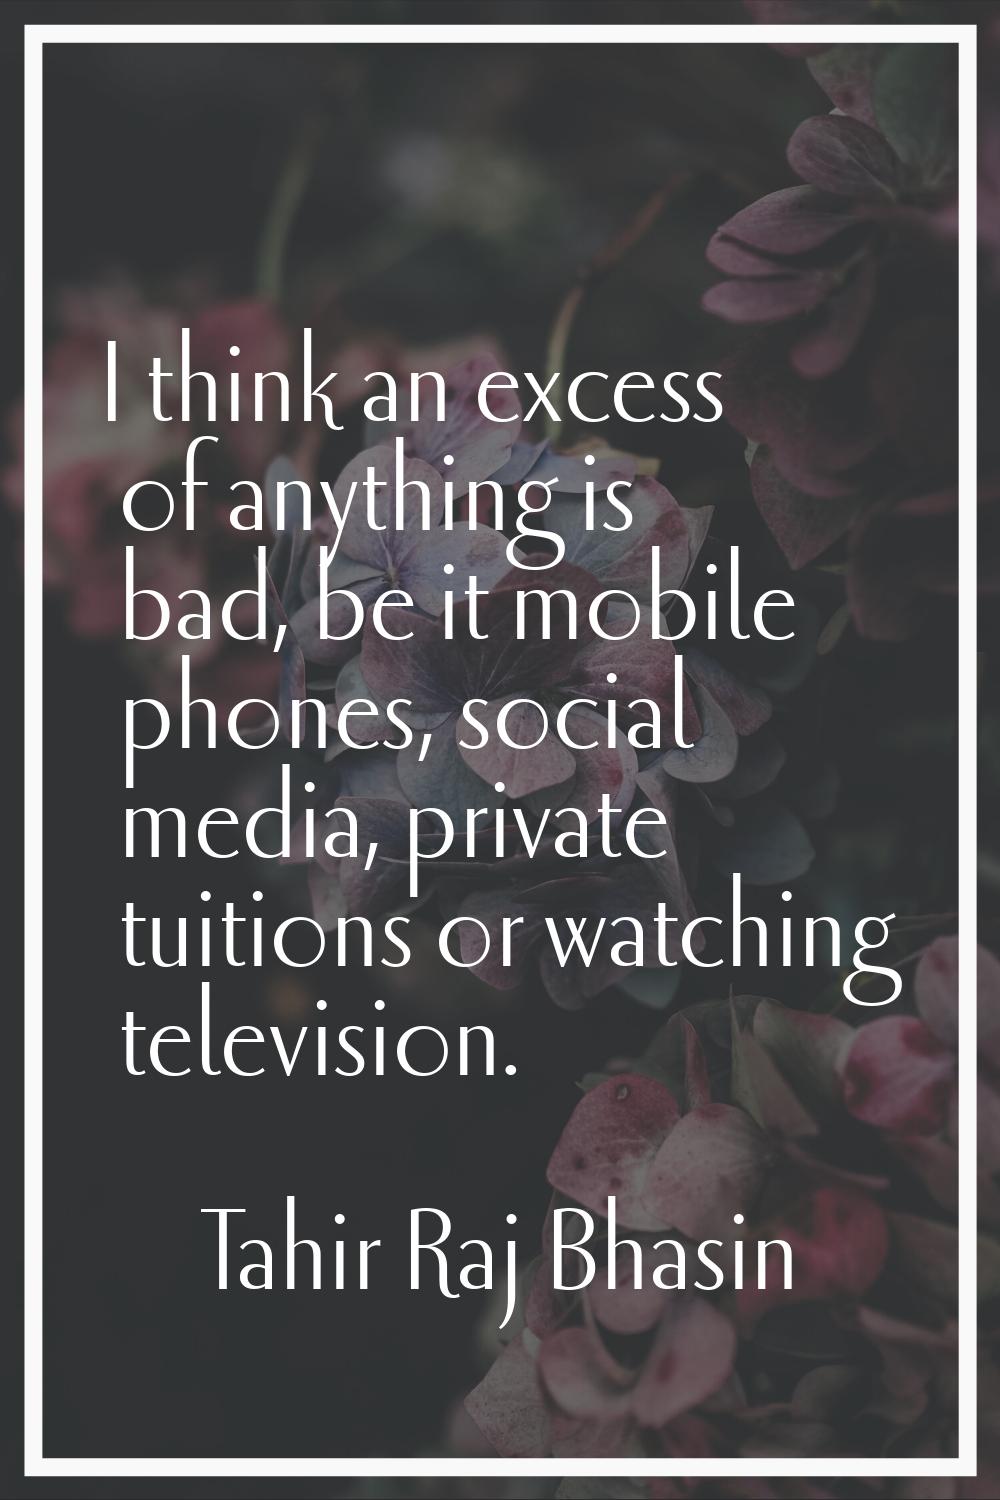 I think an excess of anything is bad, be it mobile phones, social media, private tuitions or watchi